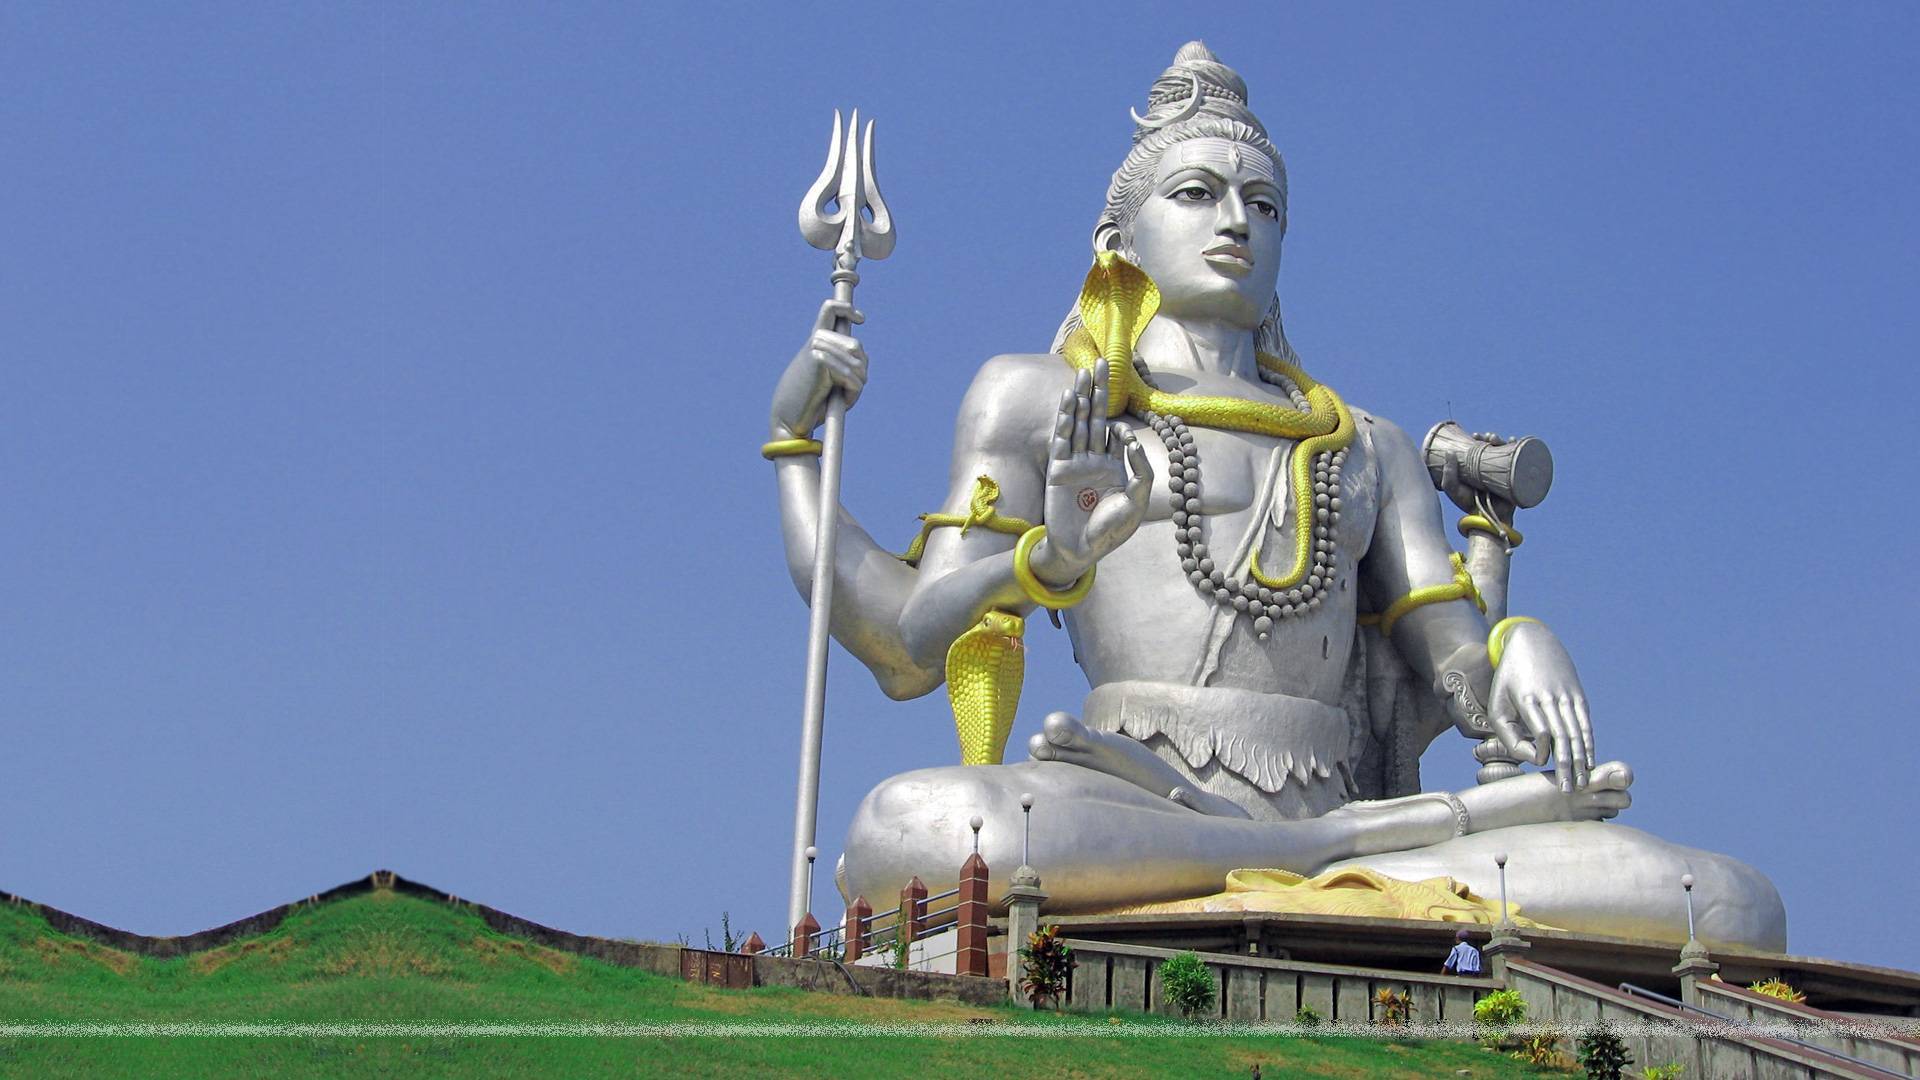 1920x1080 Lord Shiva | Lord Shiva Hd Wallpapers For Laptop